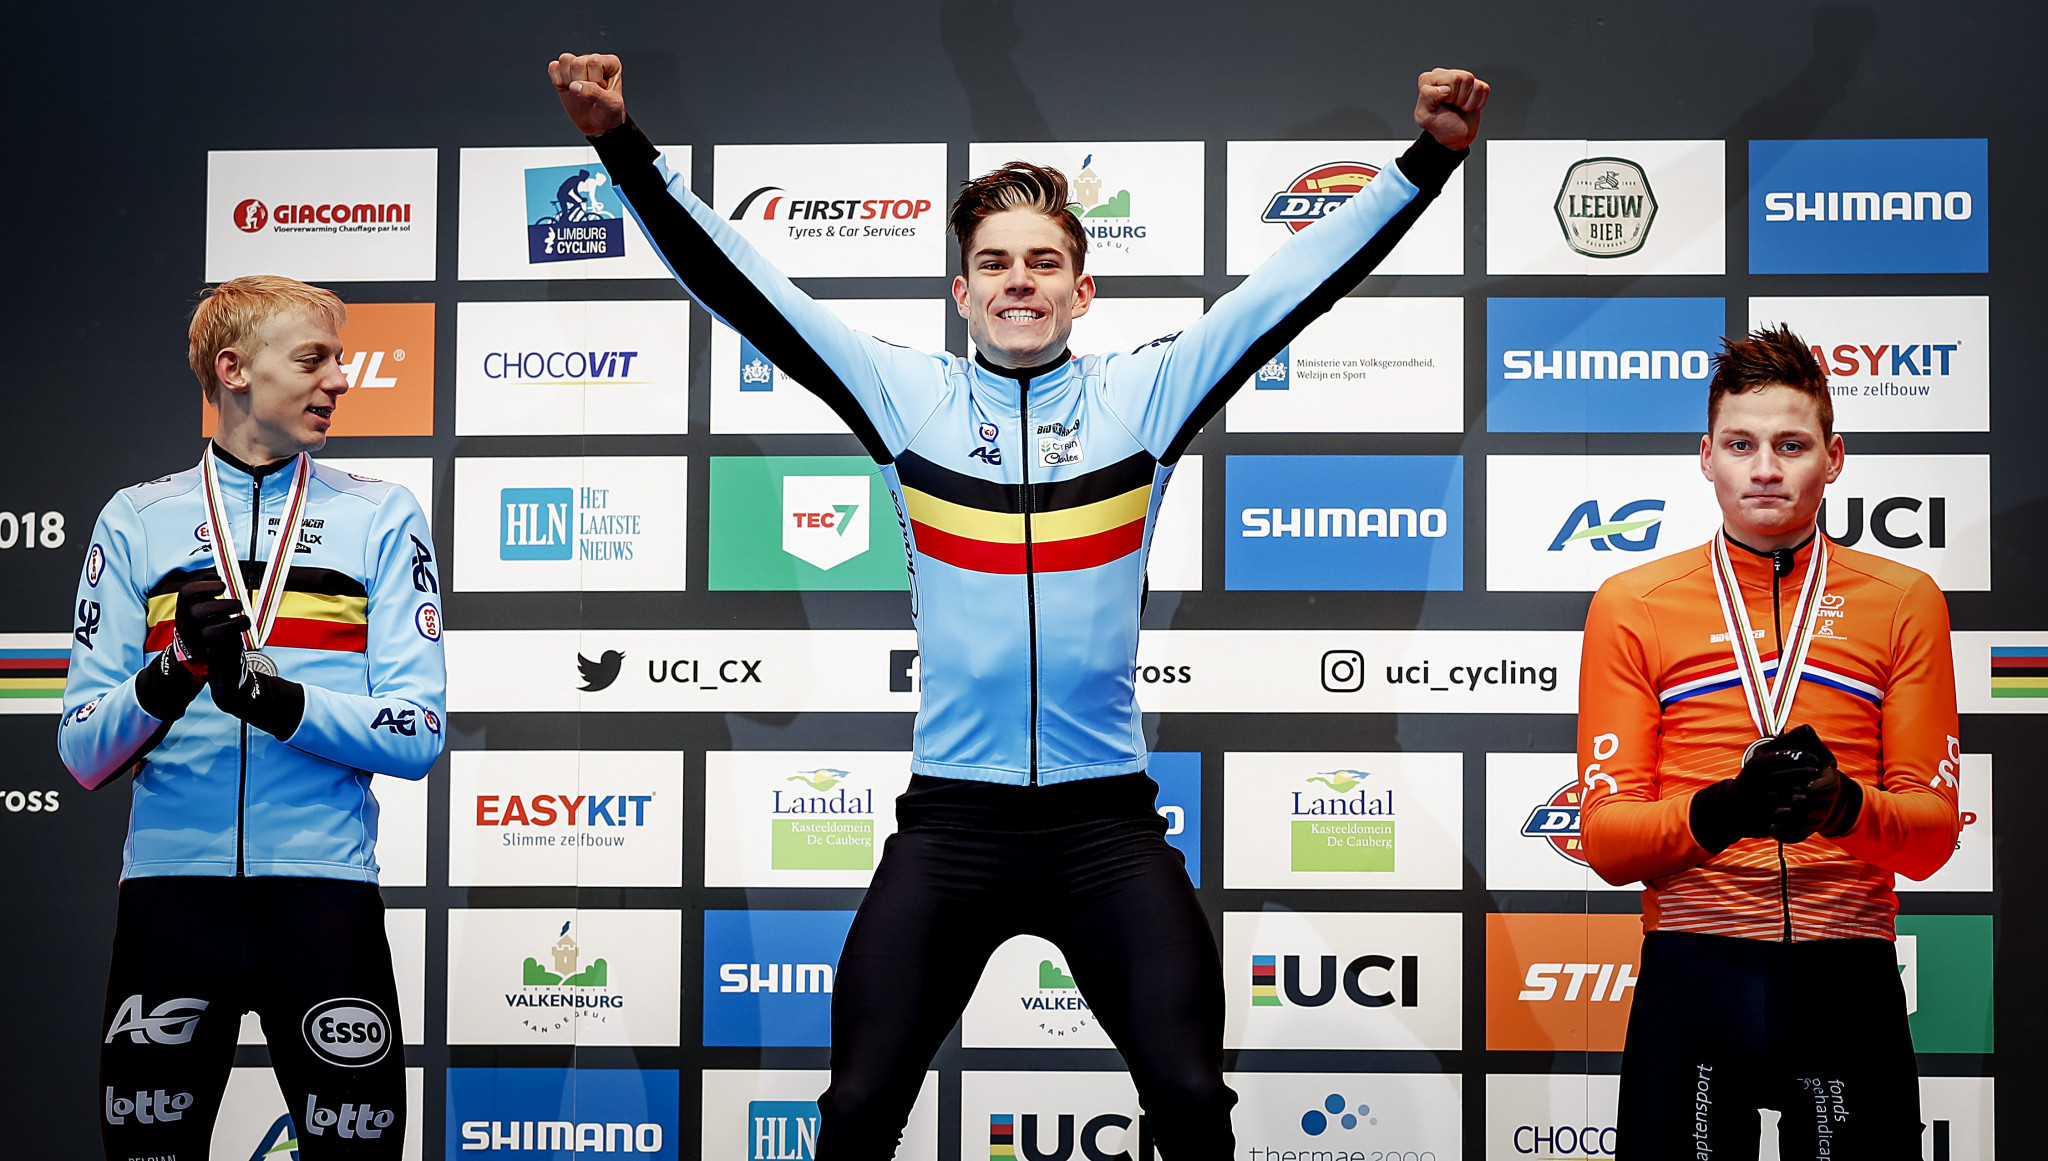 Belgium's Wout Van Aert ended two minutes clear of his rivals ©Getty Images